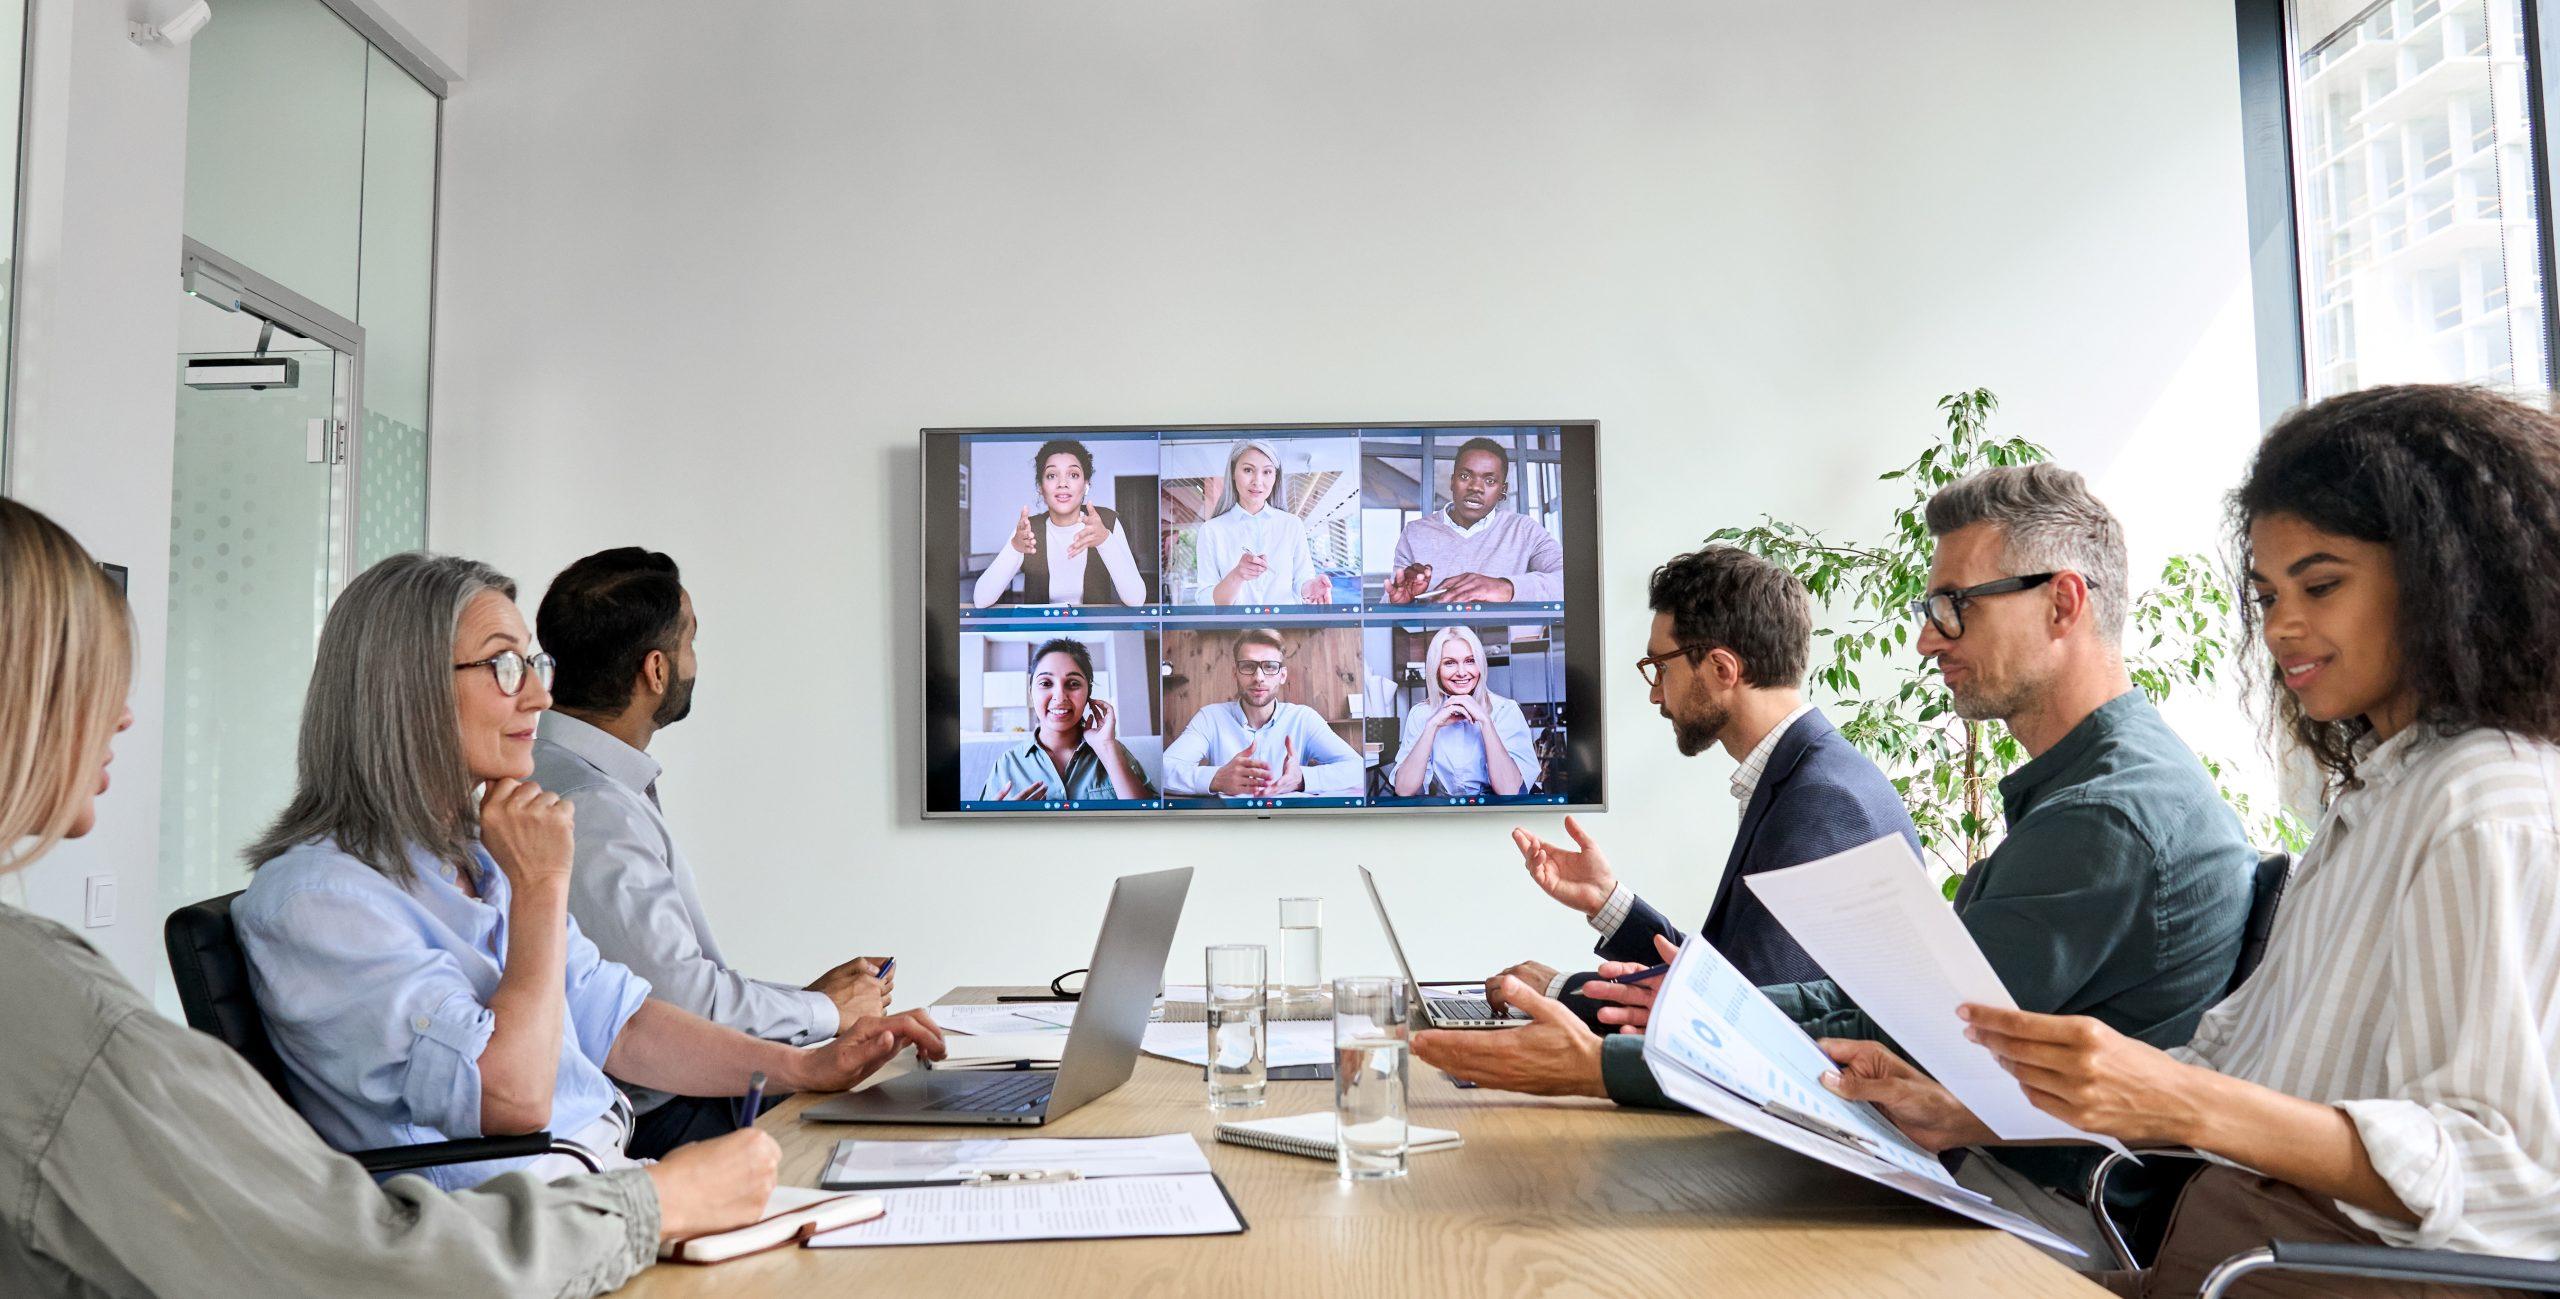 Ace the Video Call: Tips for Networking and Interviewing in a Virtual Environment